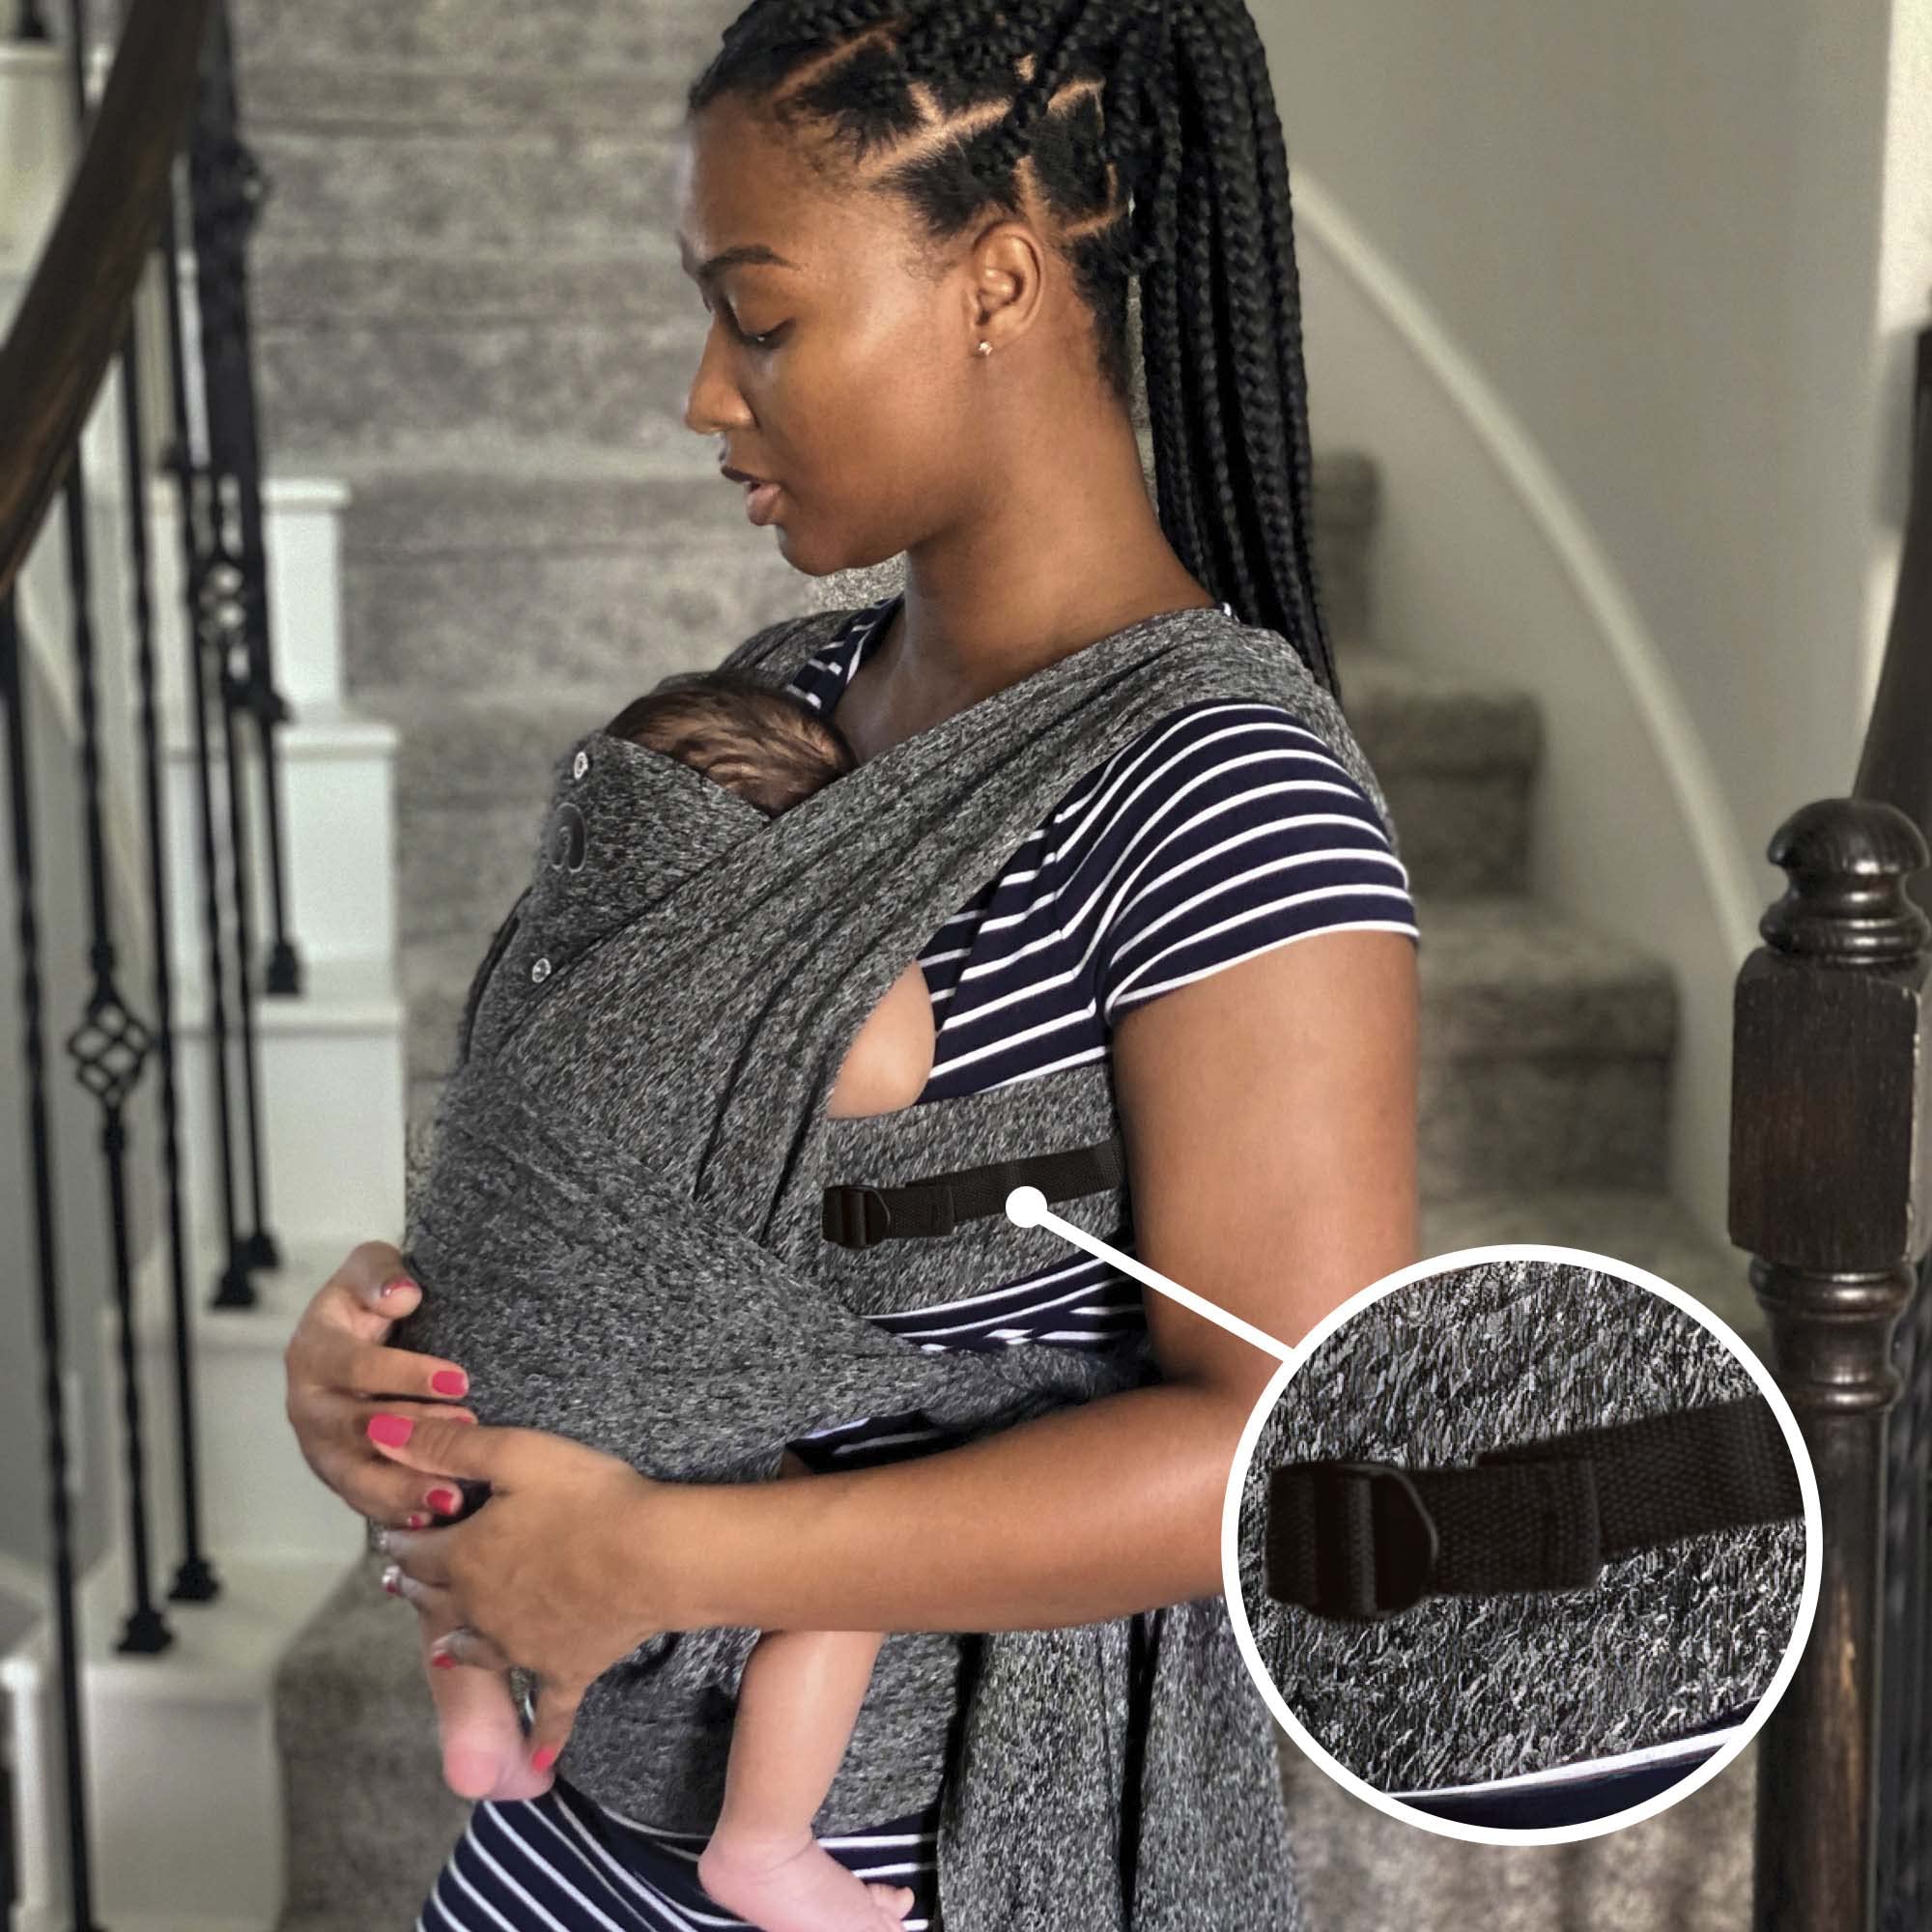 Boppy Baby Carrier- Adjustable ComfyFit, Heathered Gray, Hybrid Wrap with New Adjustable Arm Straps to Fit More Bodies, 3 Carrying Positions, 0m+ 8-35lbs, Soft Yoga-Inspired Fabric with Storage Pouch